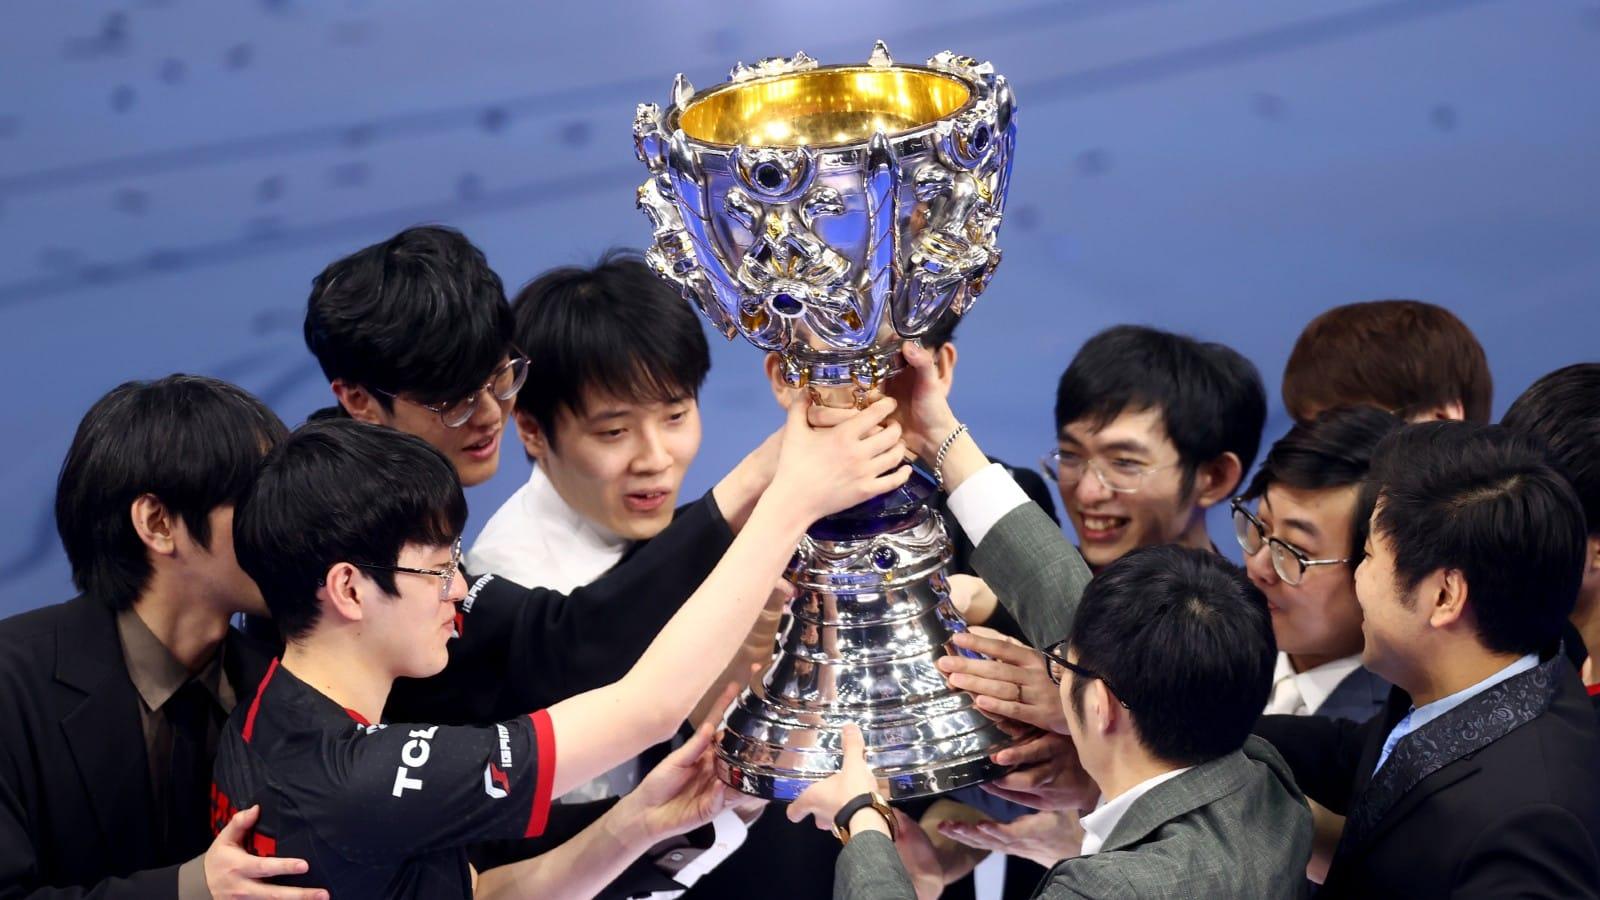 EDG lift the Summoner's Cup after winning Worlds 2021